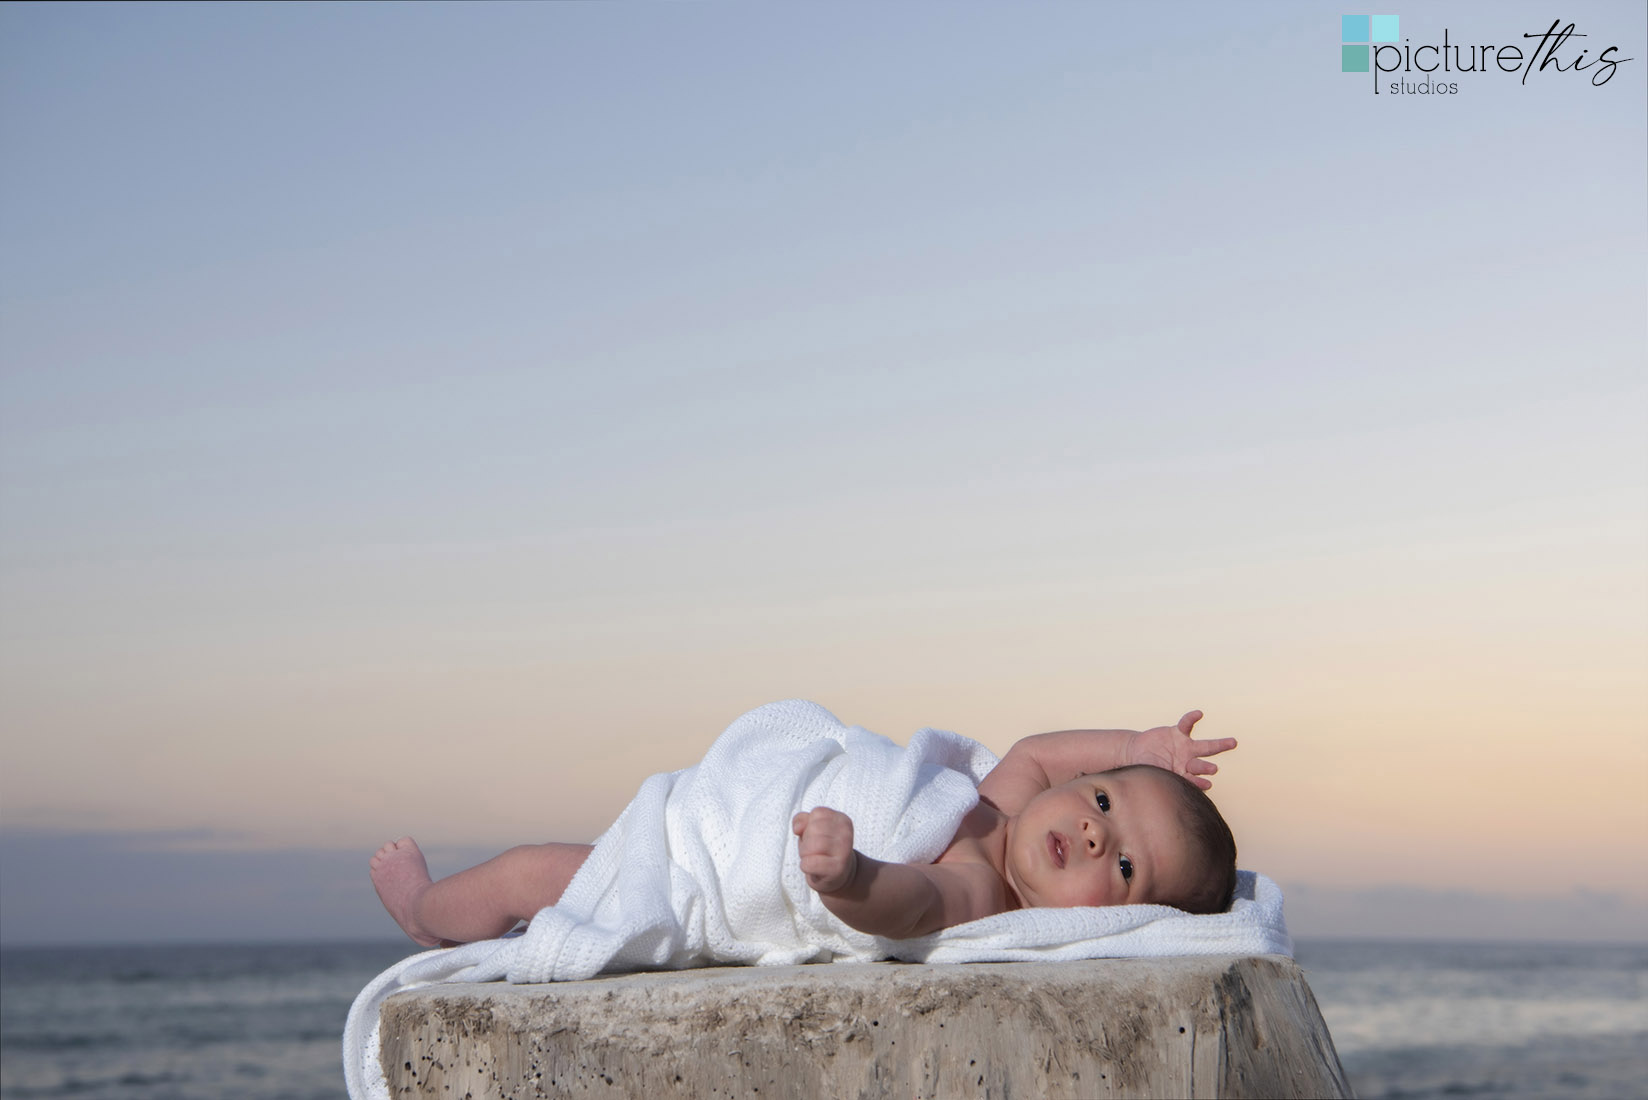 Baby Nolan’s first trip to the beach to do his newborn photos done. He was a perfect baby and Heather Holt Photography with Picture This Studios had a beautiful sunset at Spotts Beach on Grand Cayman.